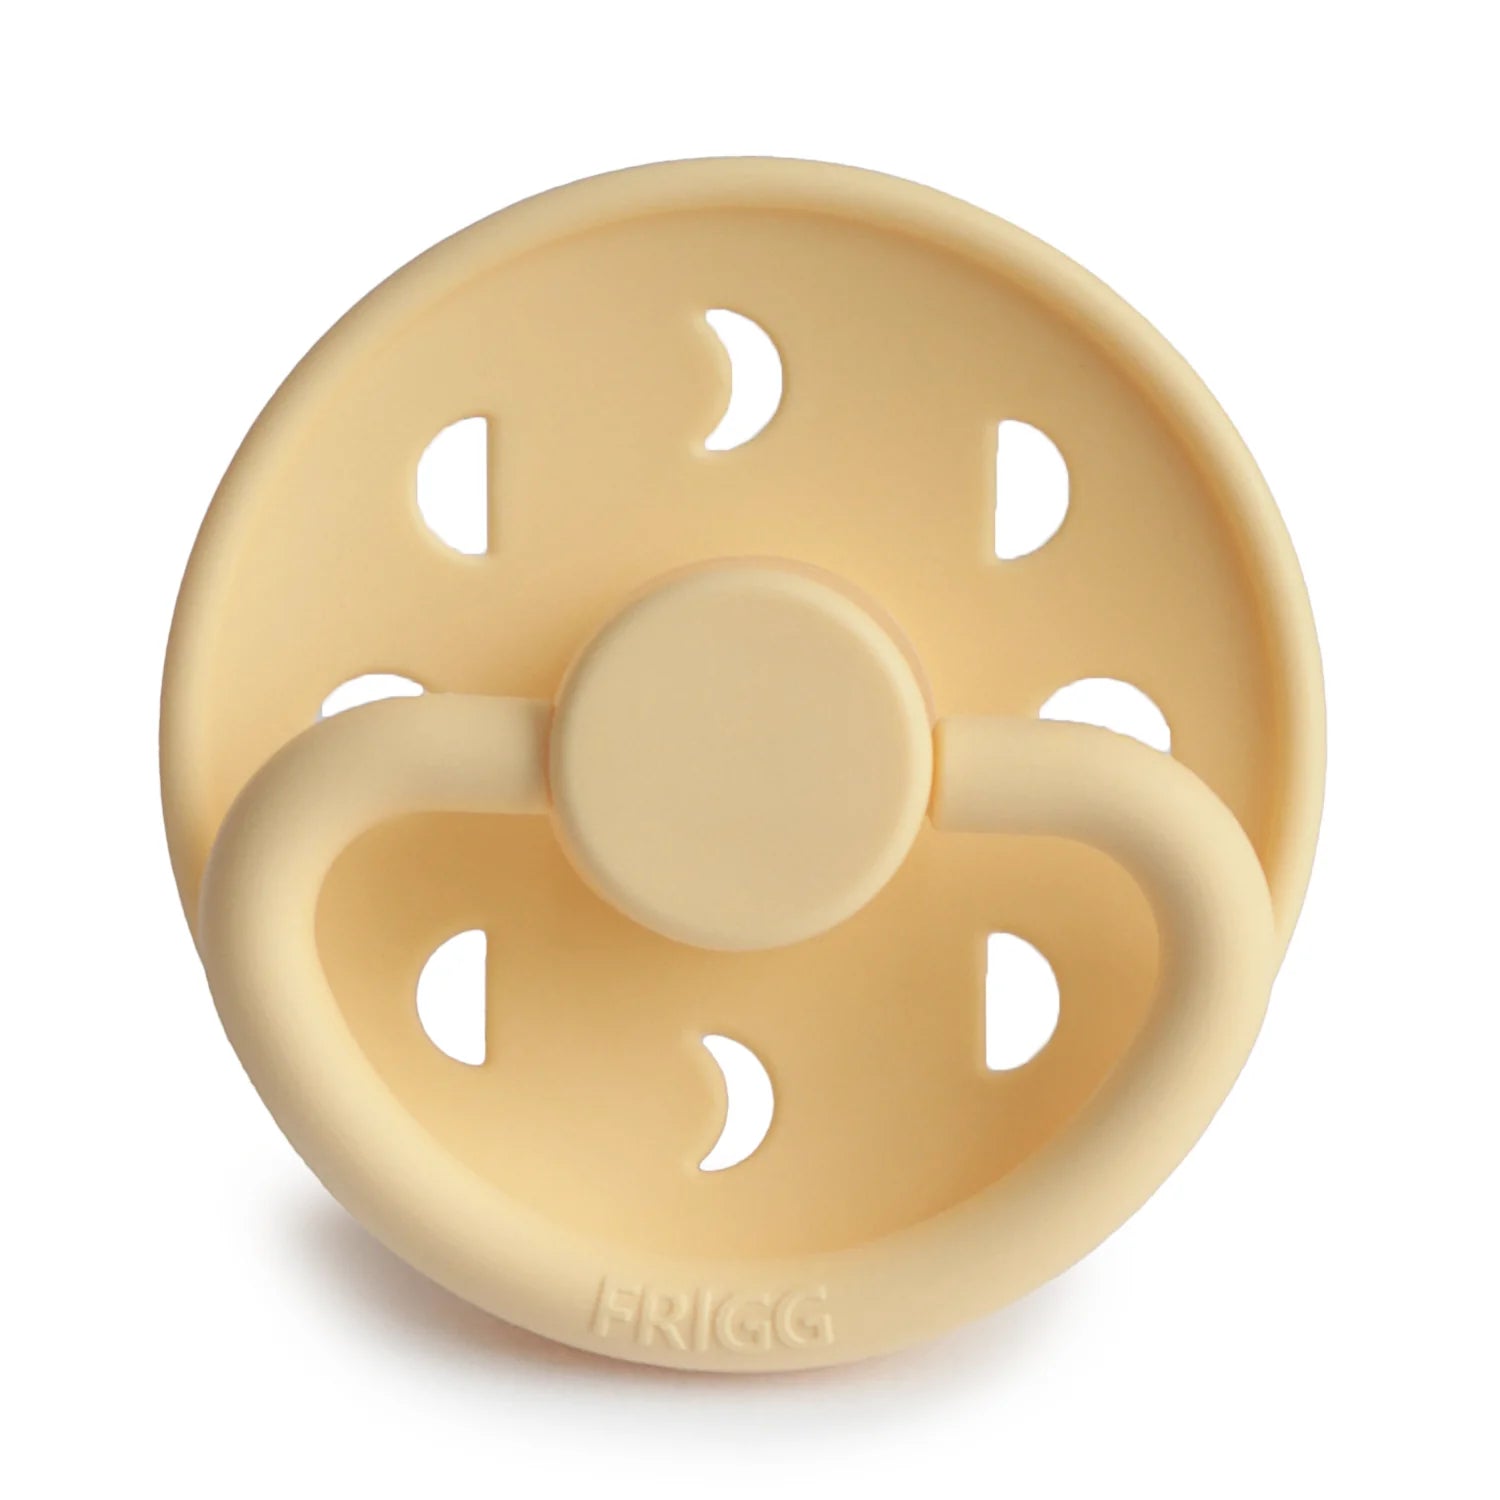 Frigg Moon Phase Silicone Pacifier - Pale Daffodil available at Little Mash Boutique